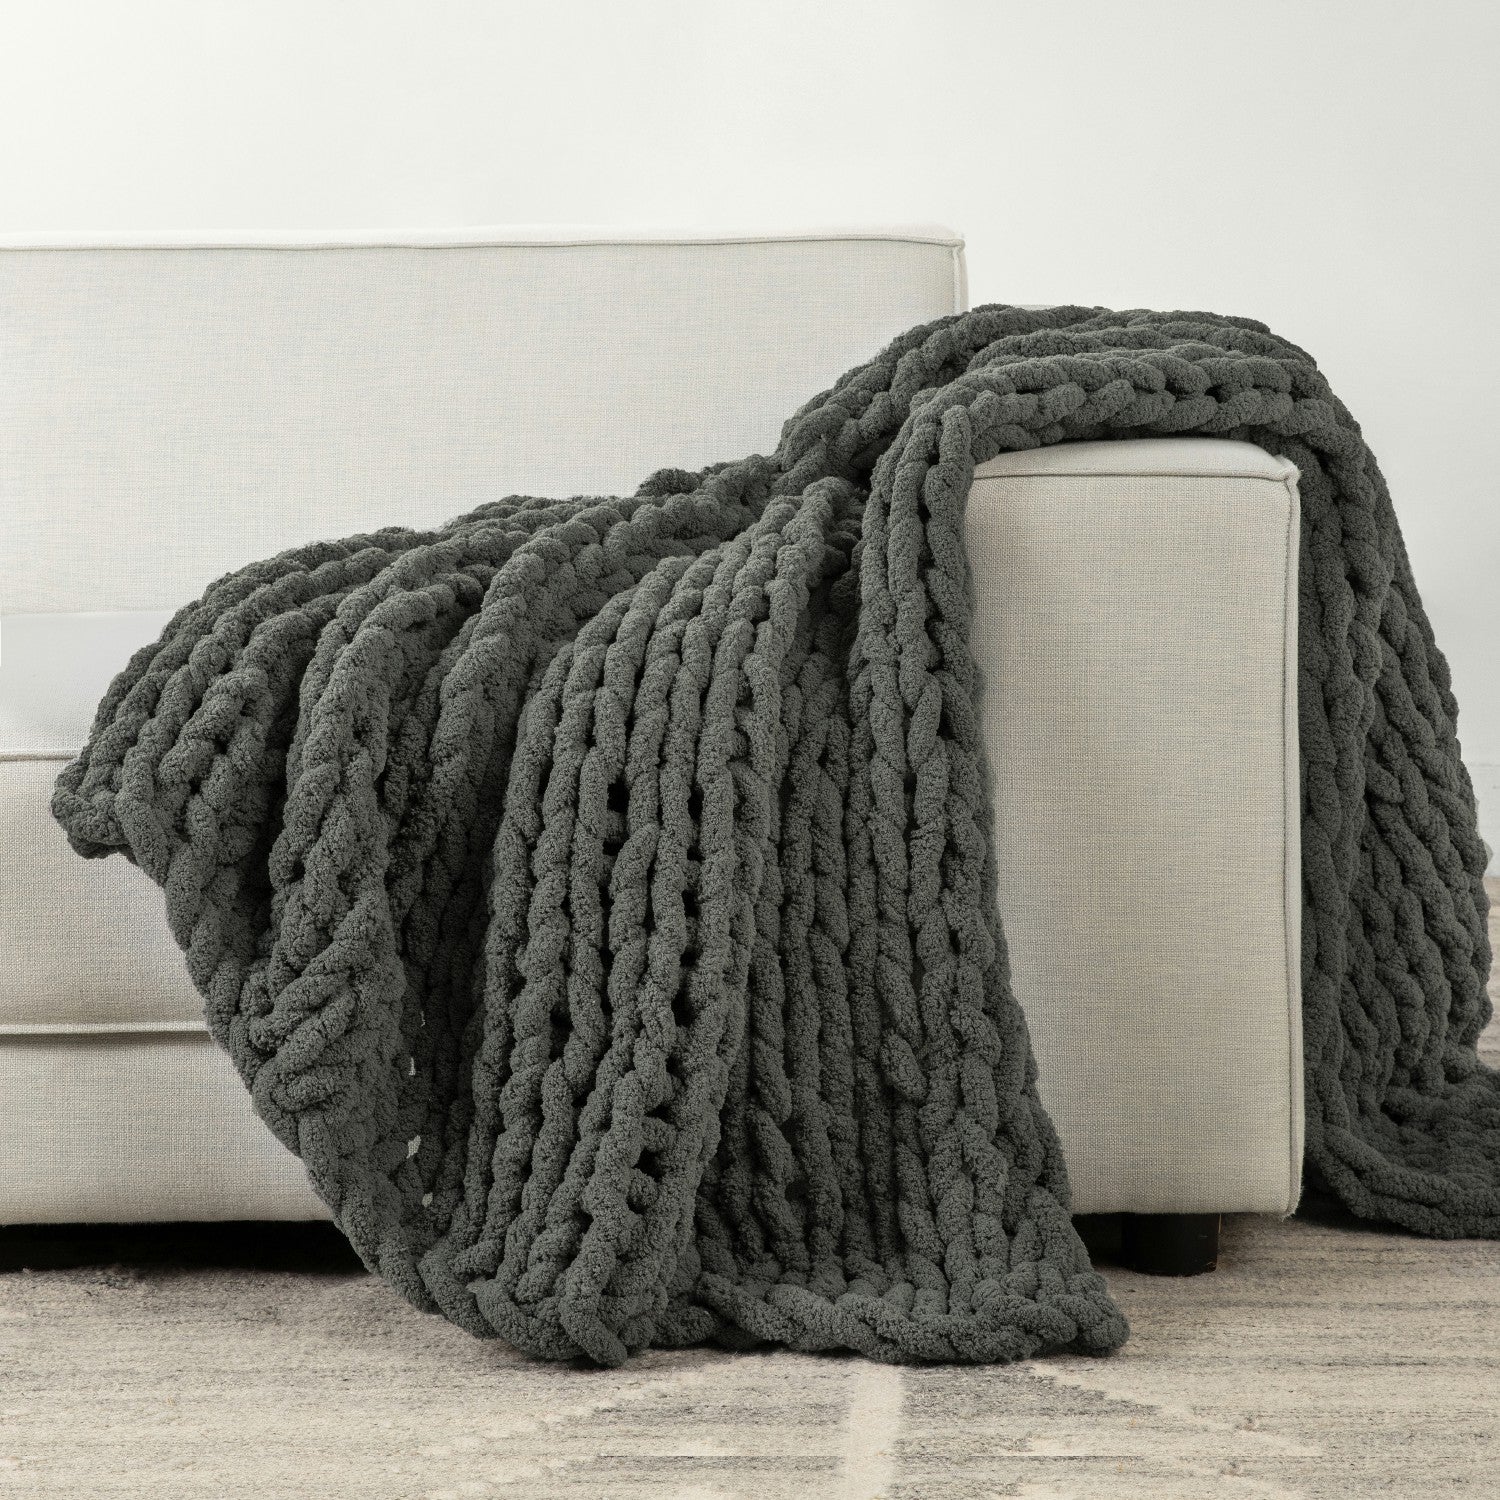 Fishbone Thick Thread Knitted Blanket, 51*63in / Dark Gray